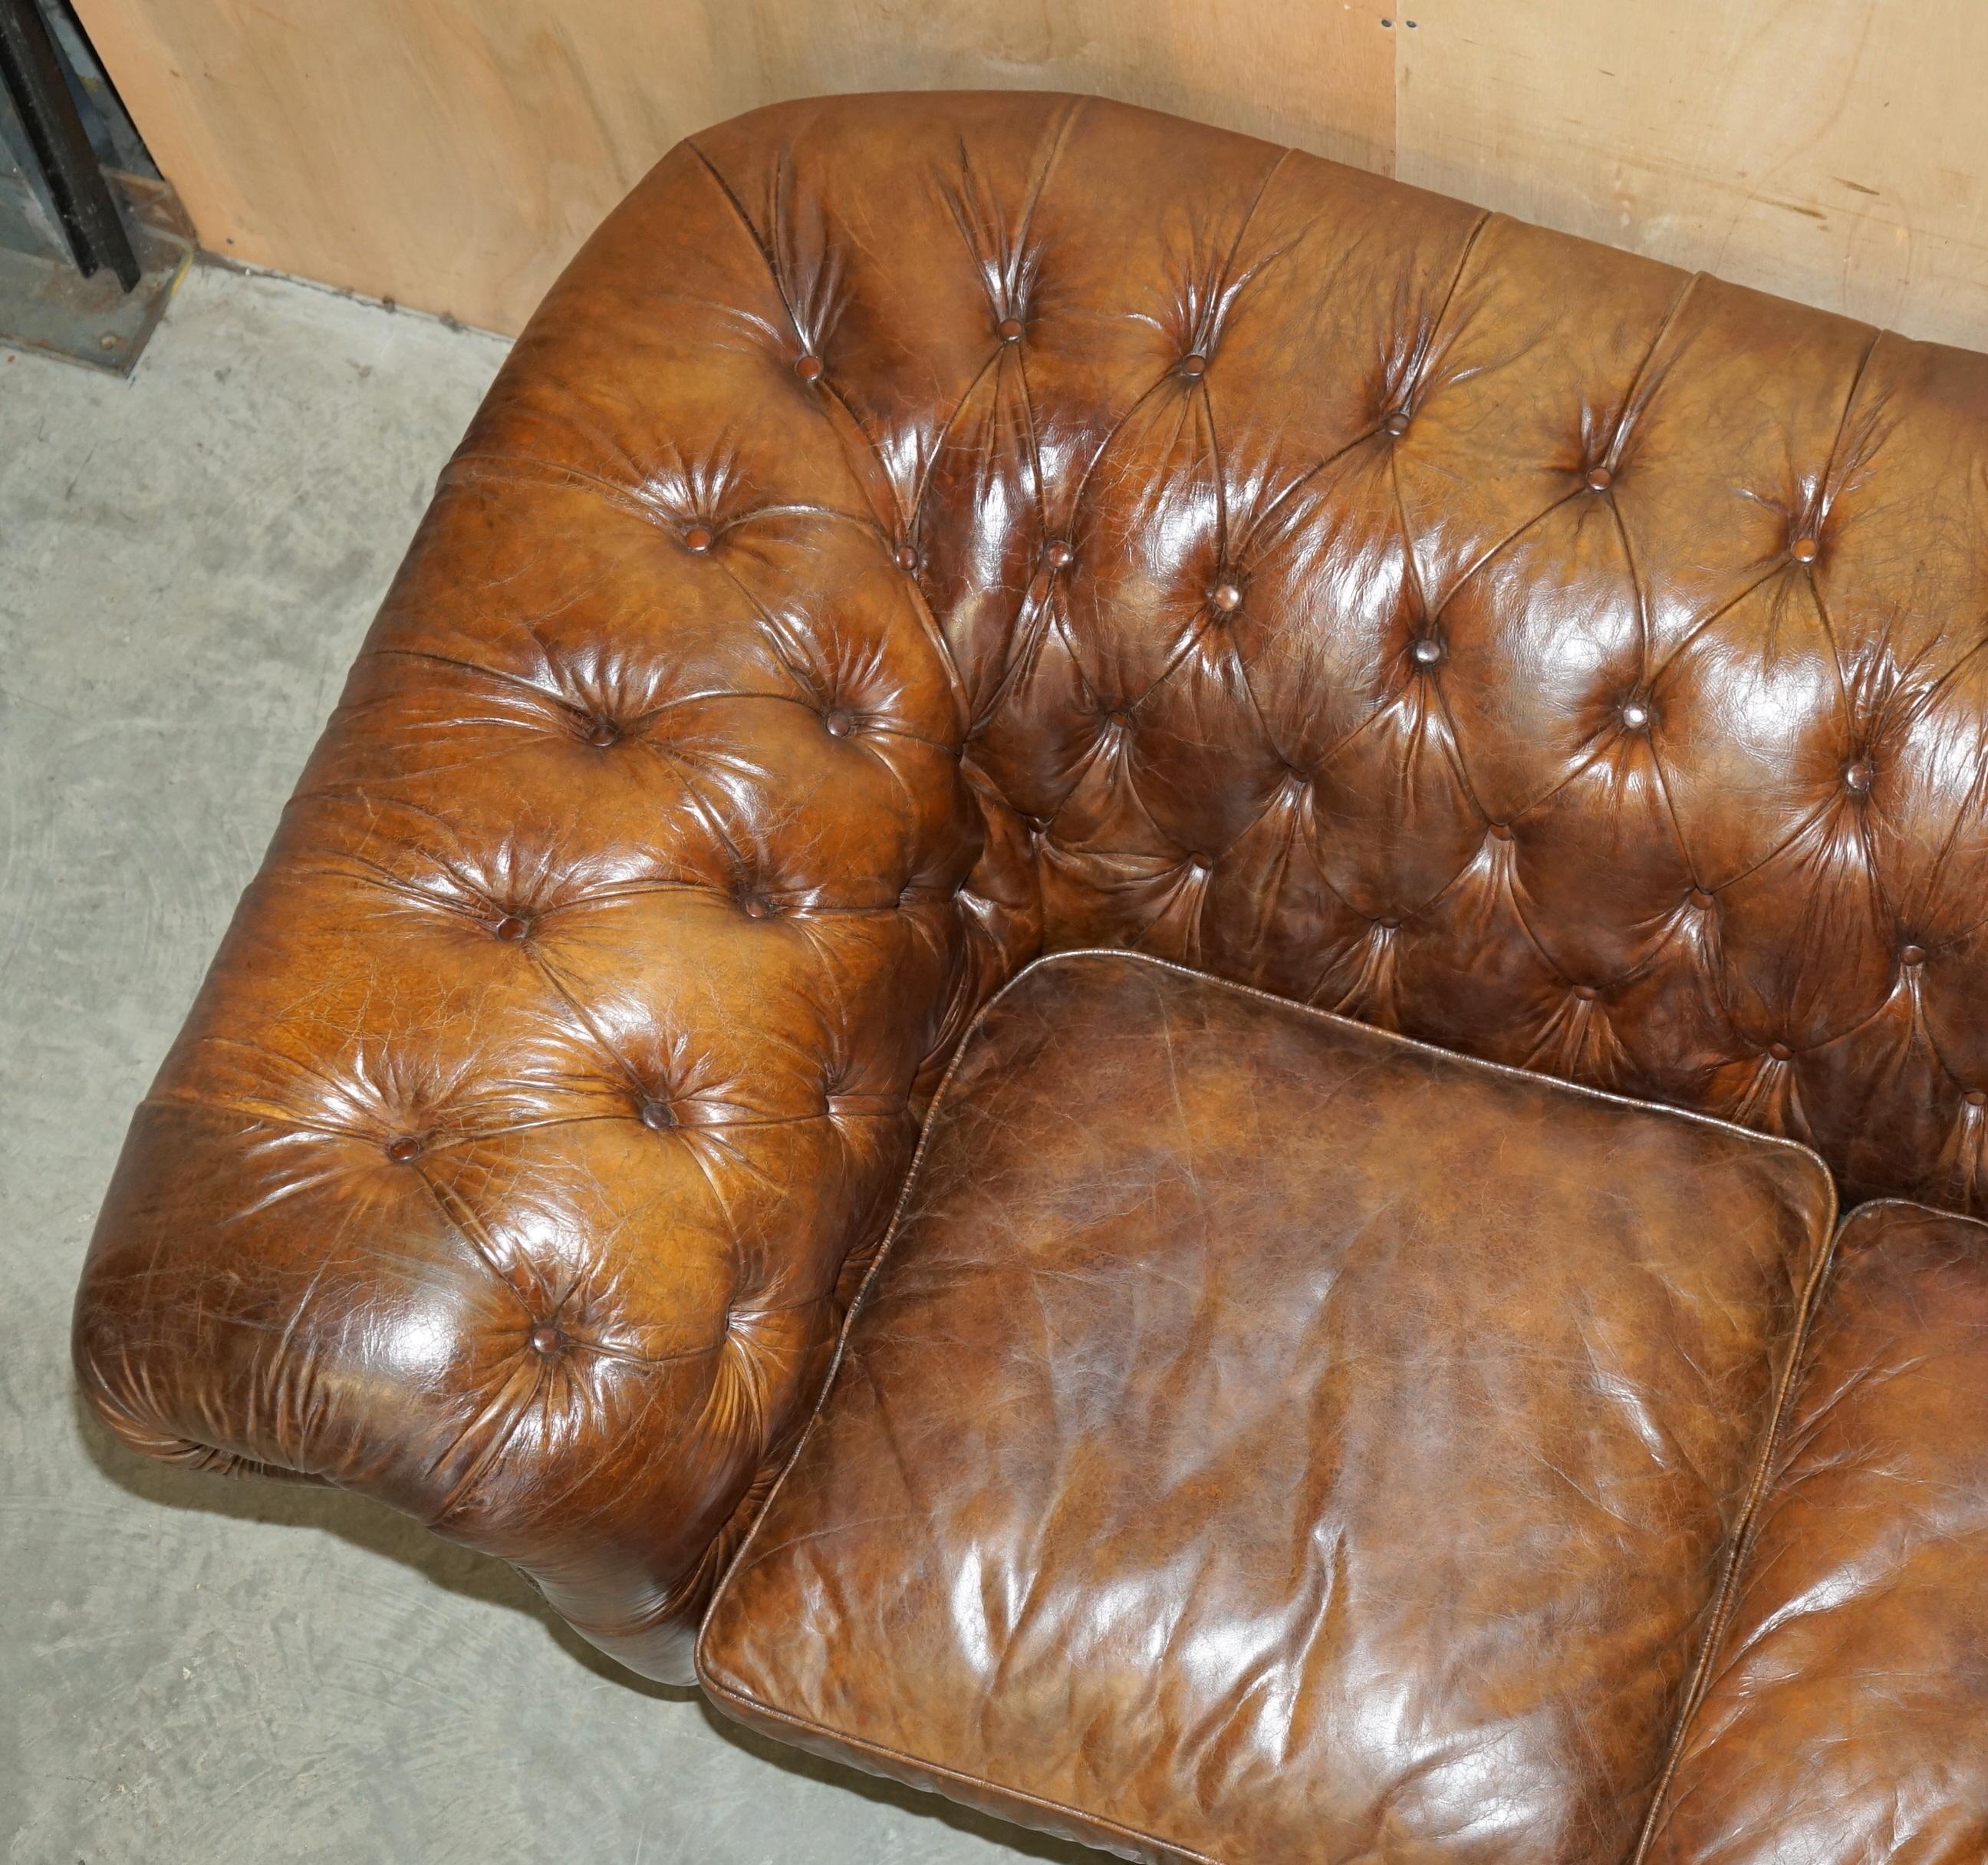 1 von 2 TIMOTHY OULTON HERiTAGE BROWN VINTAGE LEATHER CHESTERFIELD HALO SOFAS im Angebot 22